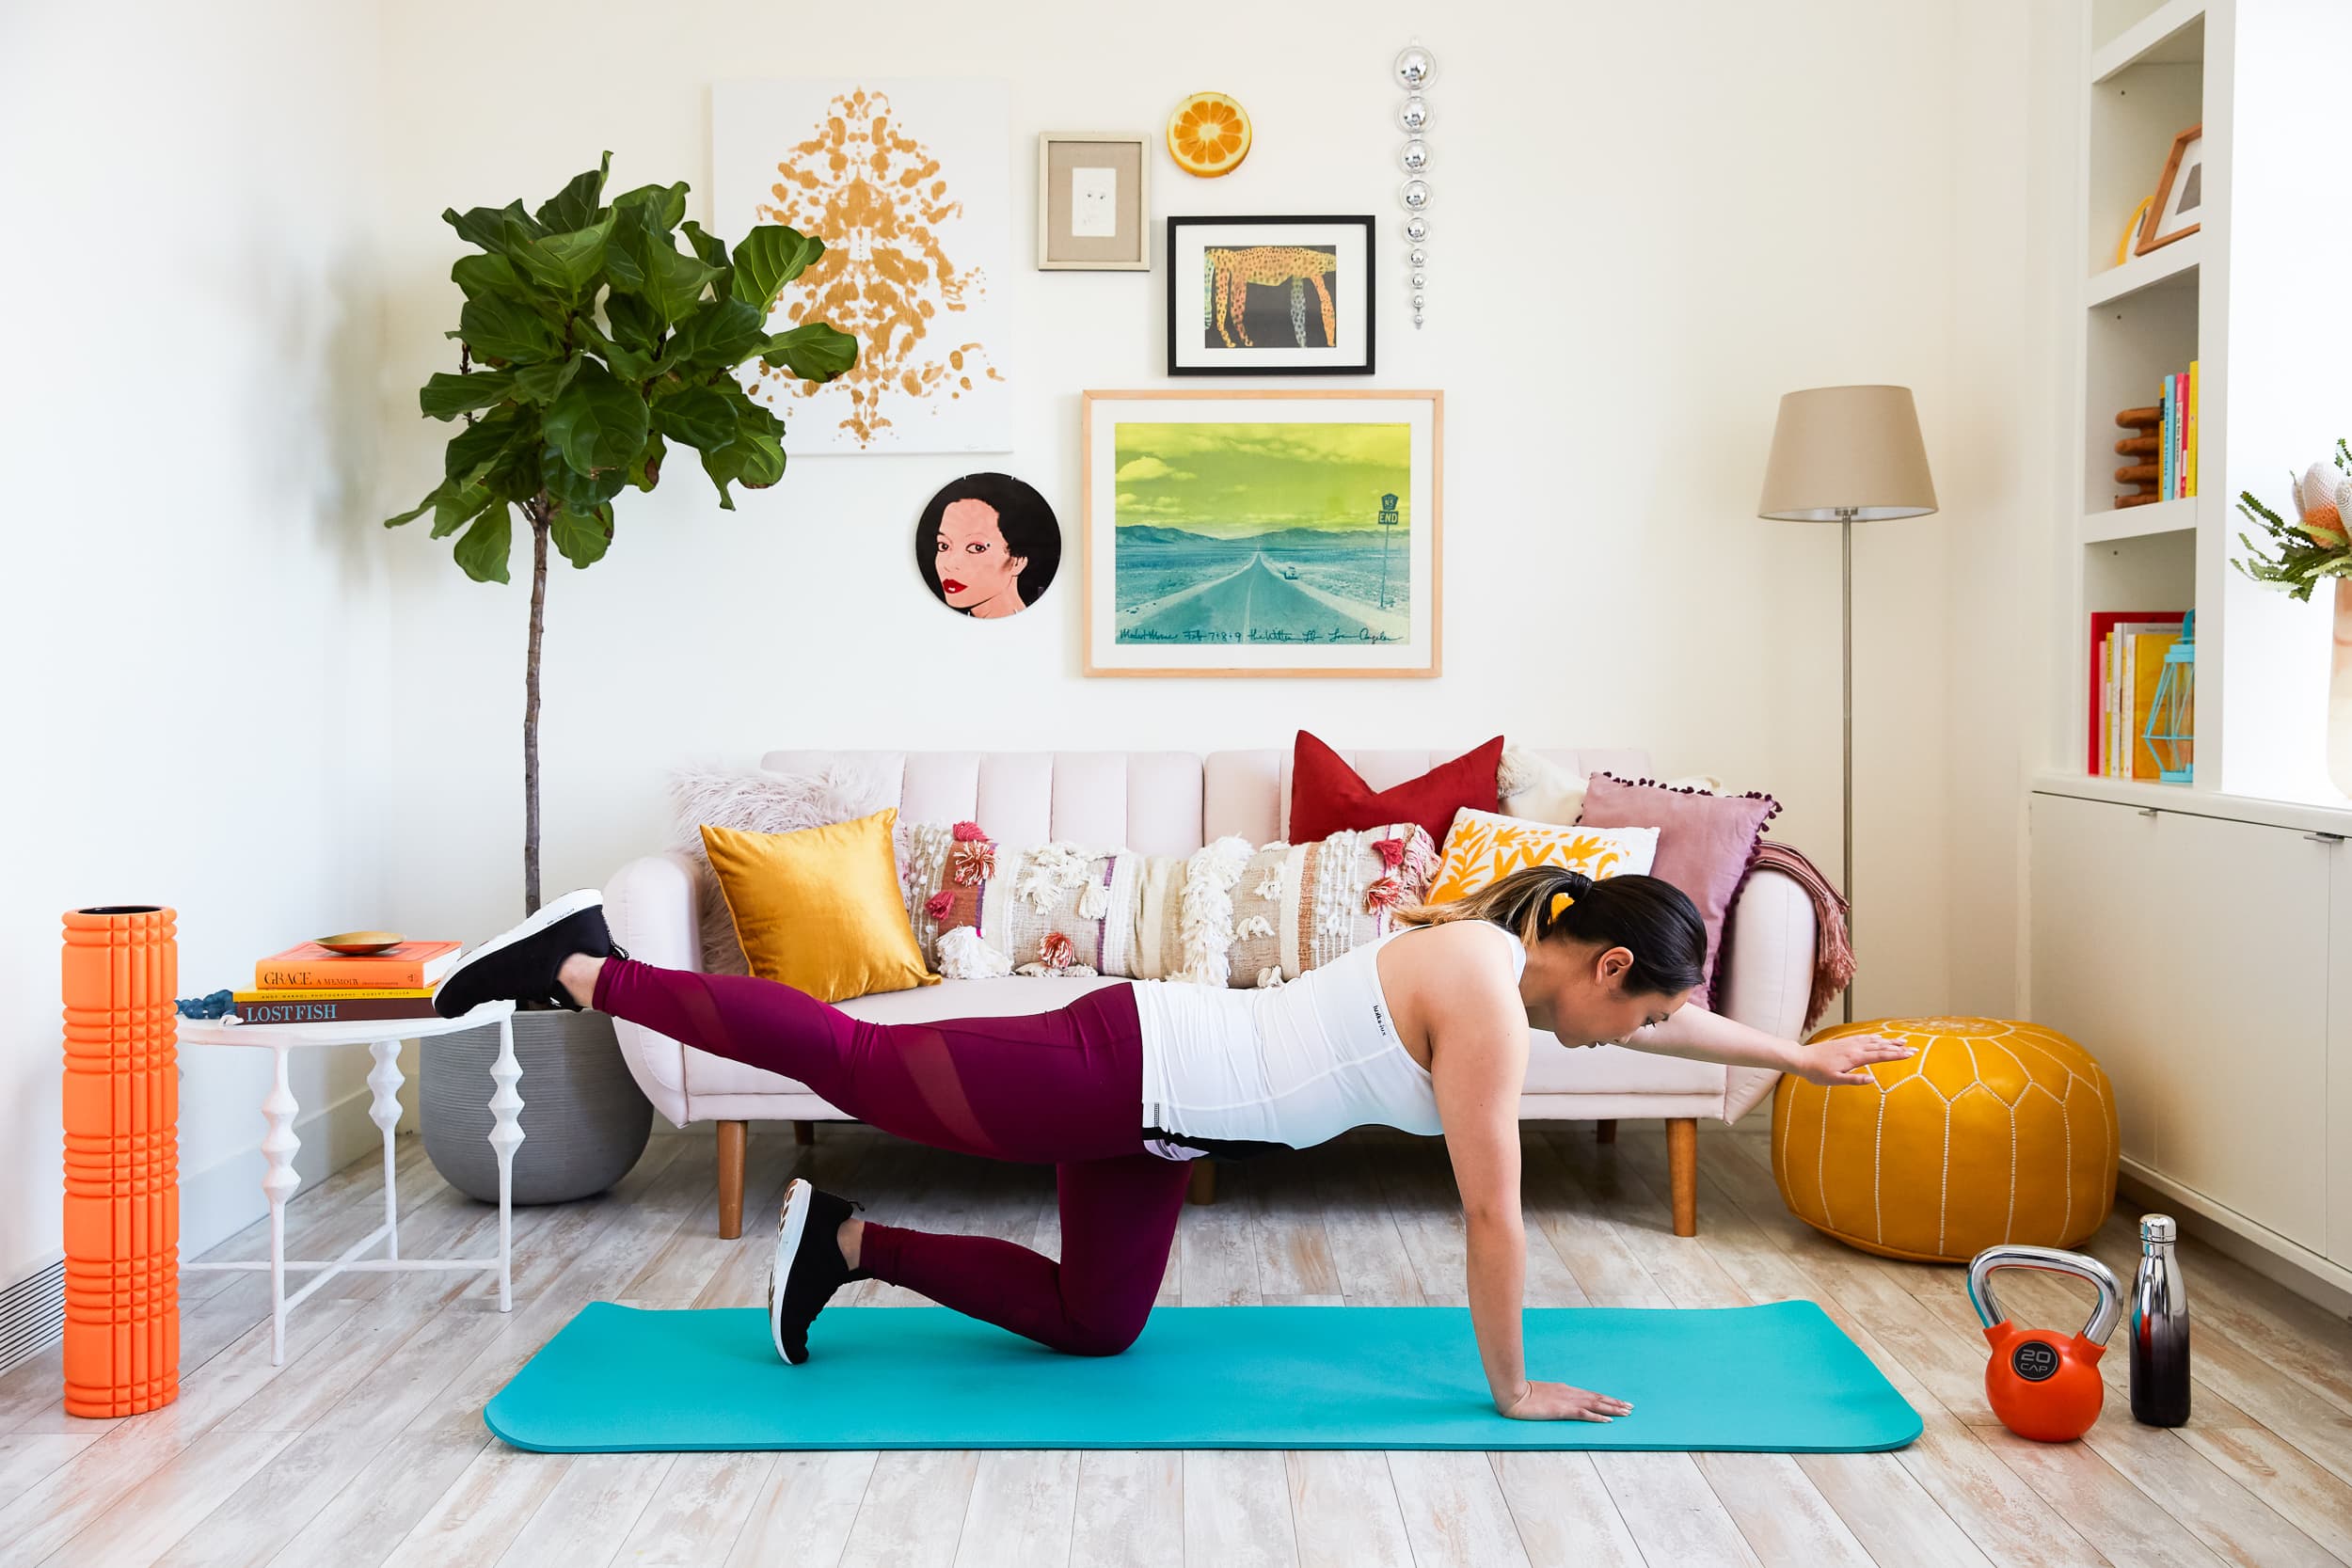 Home items that can be used as workout equipment